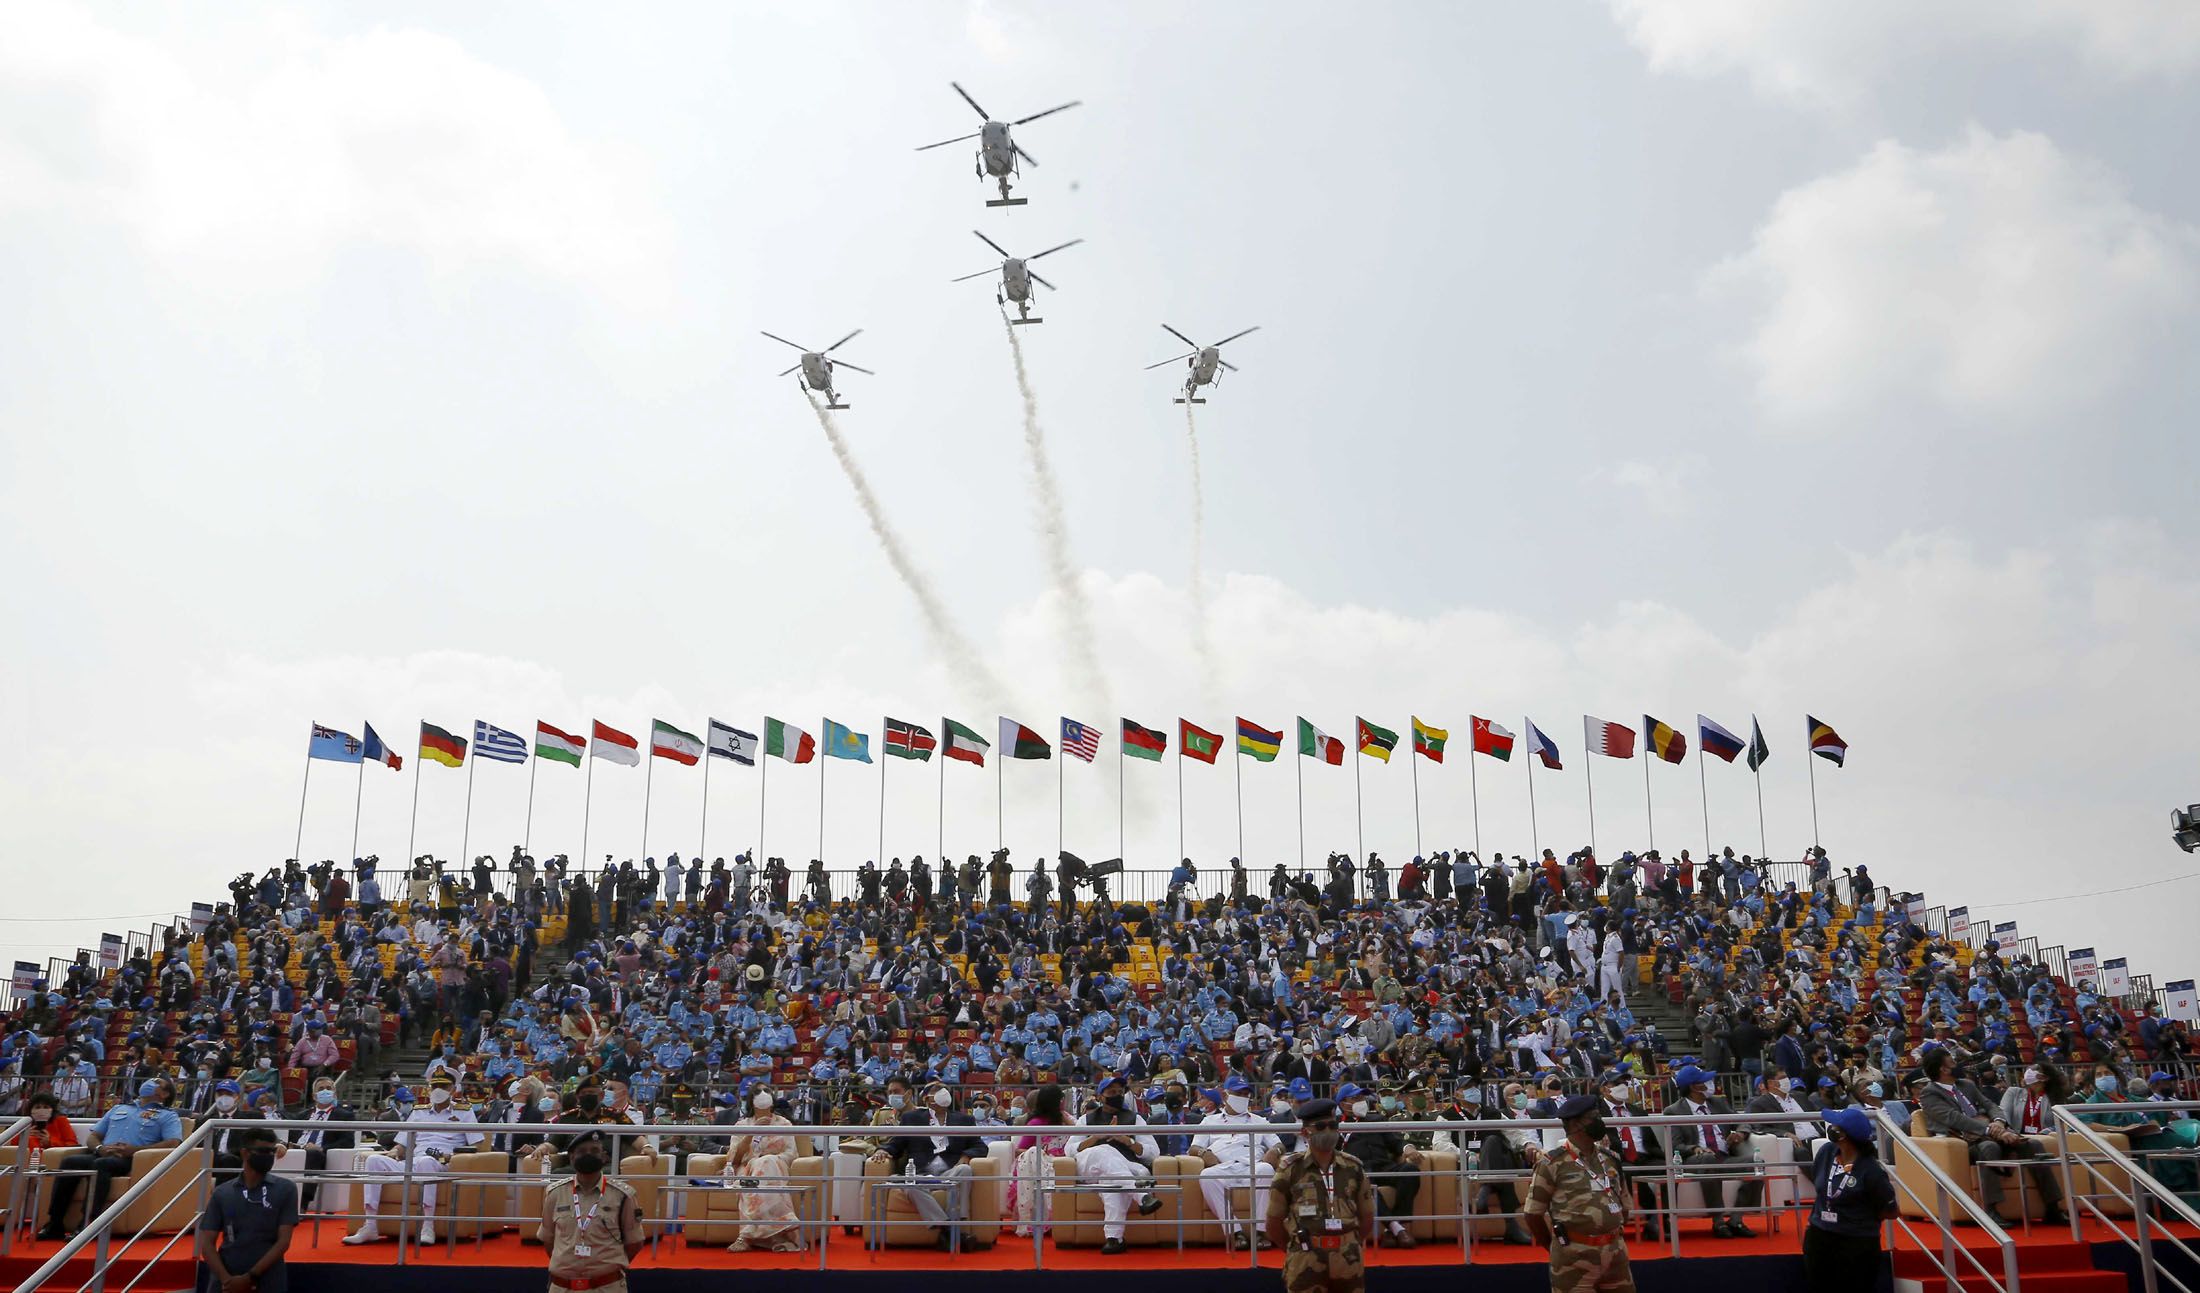 The Union Minister for Defence, Shri Rajnath Singh at the Aero India 2021 biennial Air Show, at the Air Force Station, Yelahanka, in Bengaluru on February 03, 2021.